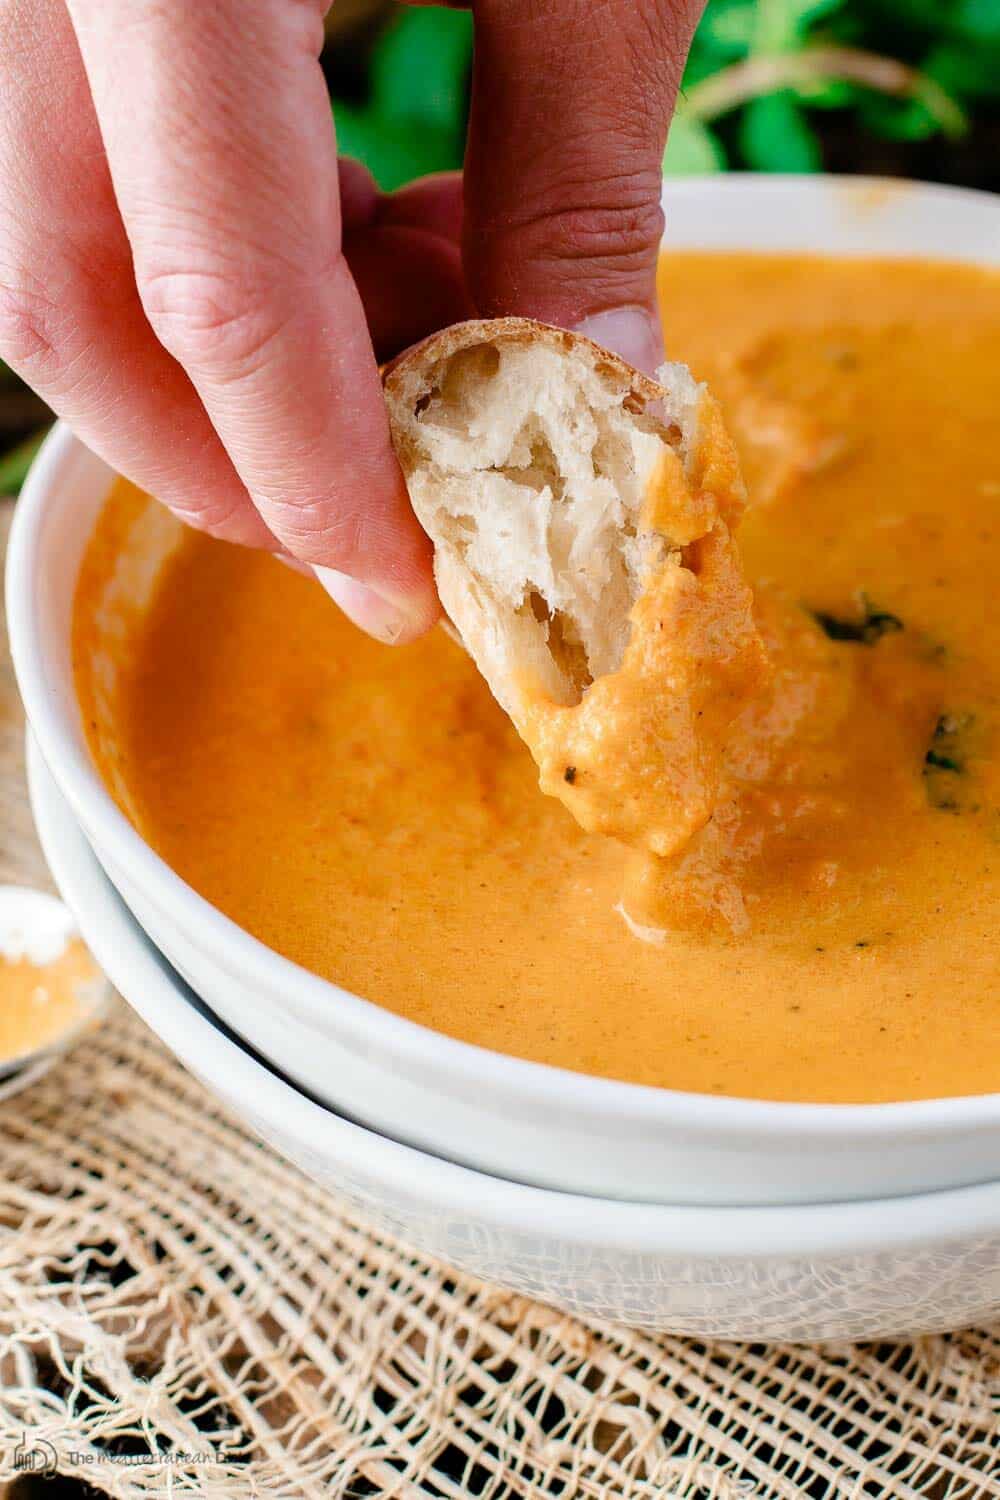 Roasted Carrot soup with ginger and Mediterranean spices. Served with crusty bread to dip